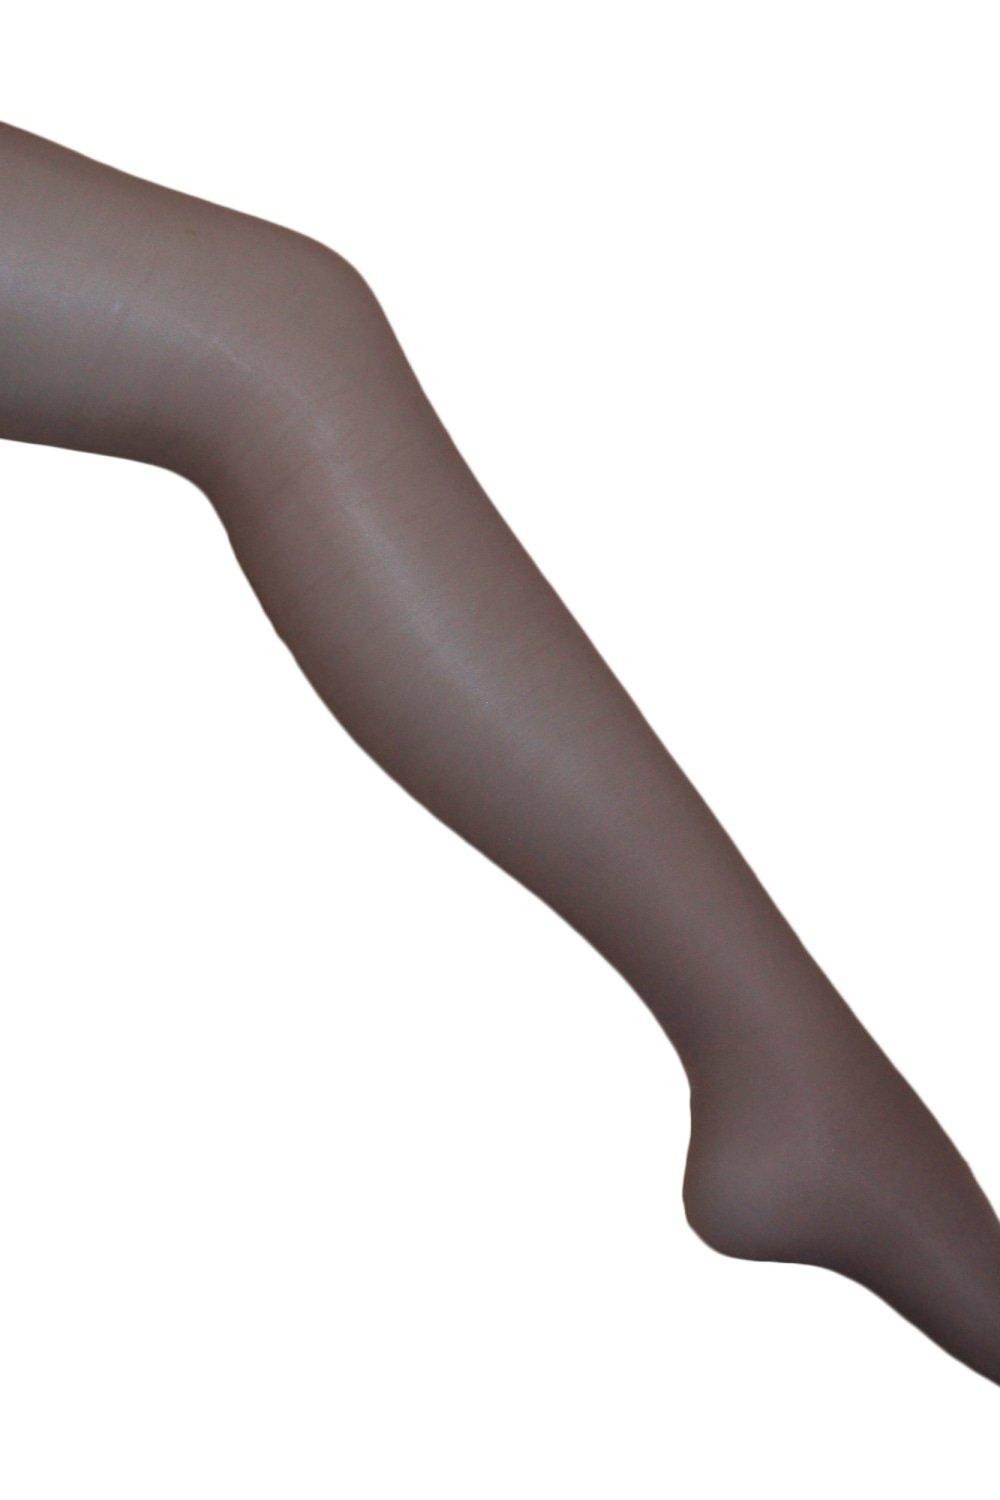 Silky Medium Support Tights Factor 8 Compression – Simply Hosiery Online